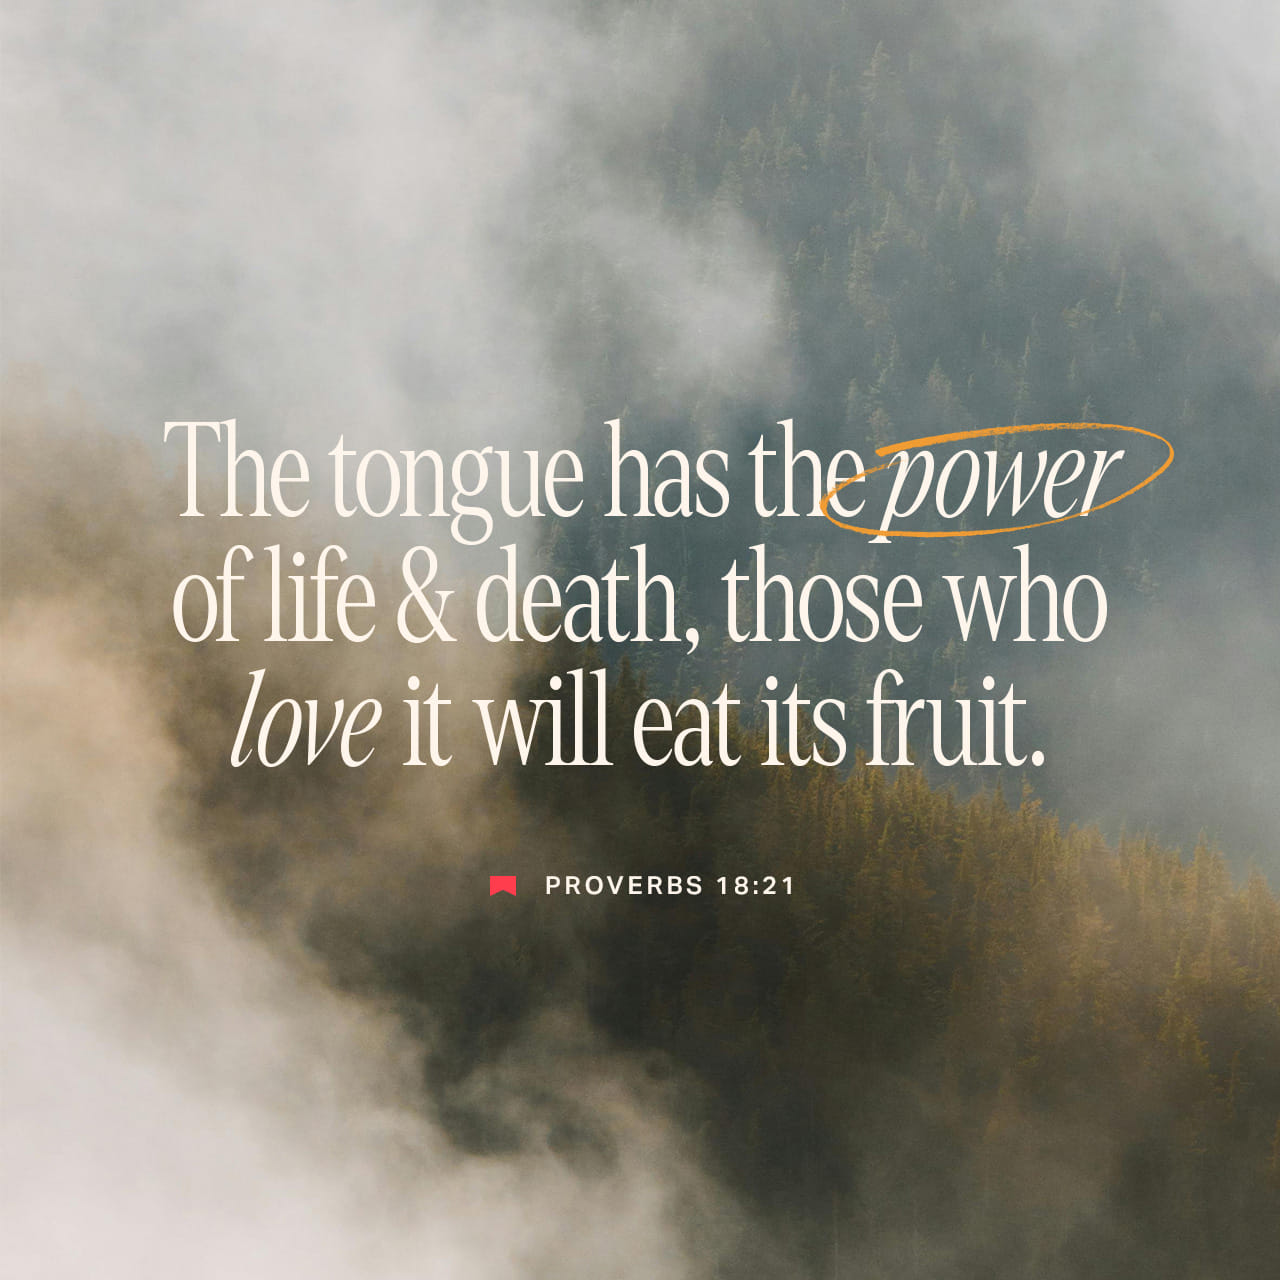 Proverbs 18:21 Death and life are in the power of the tongue:
And they that love it shall eat the fruit thereof. | King James Version (KJV) | Download The Bible App Now